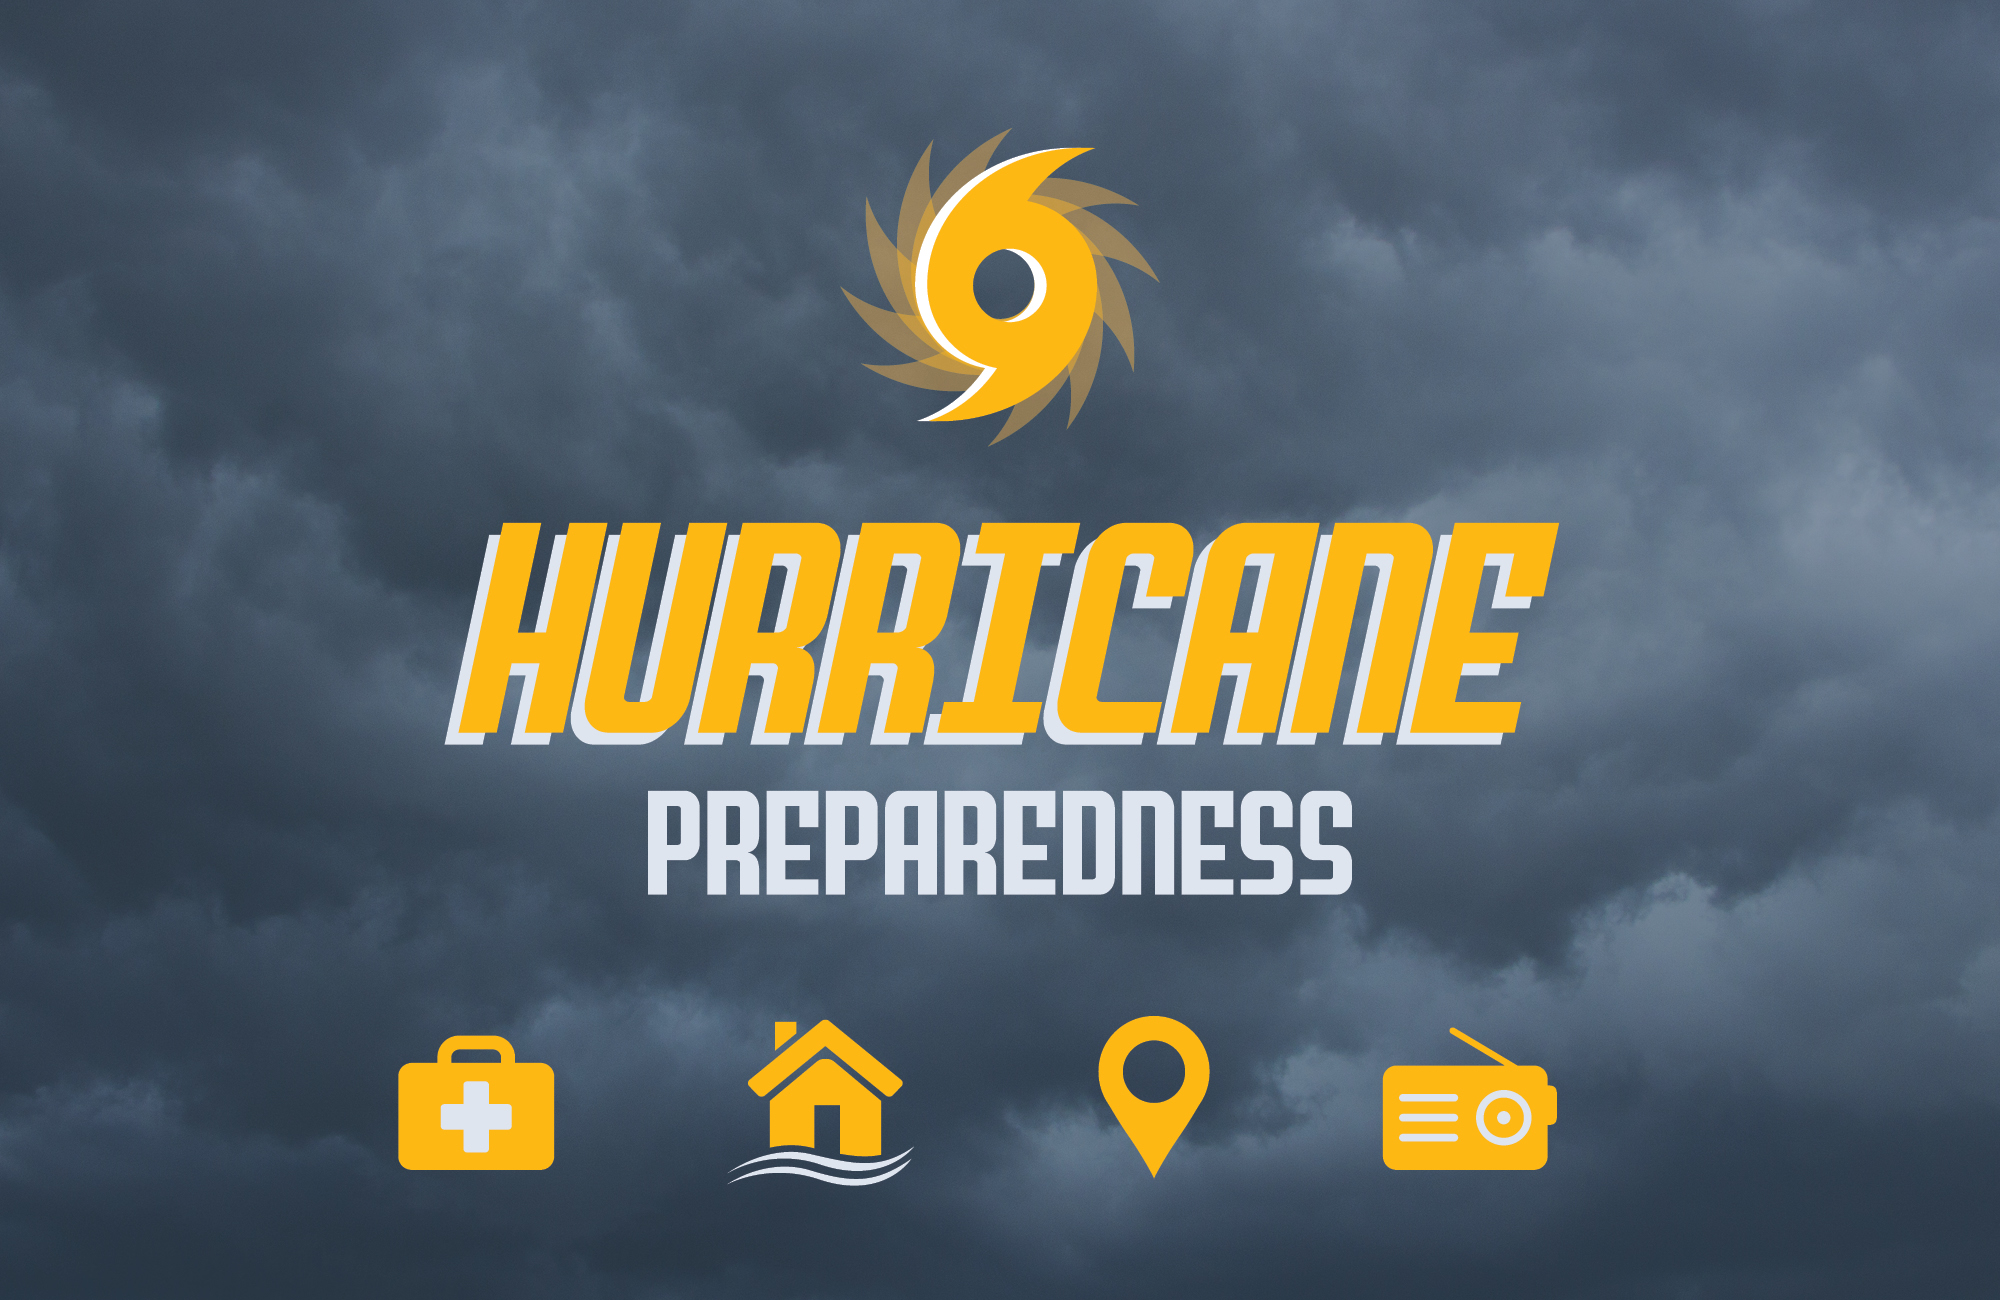 Are you prepared for a hurricane? Follow these tips